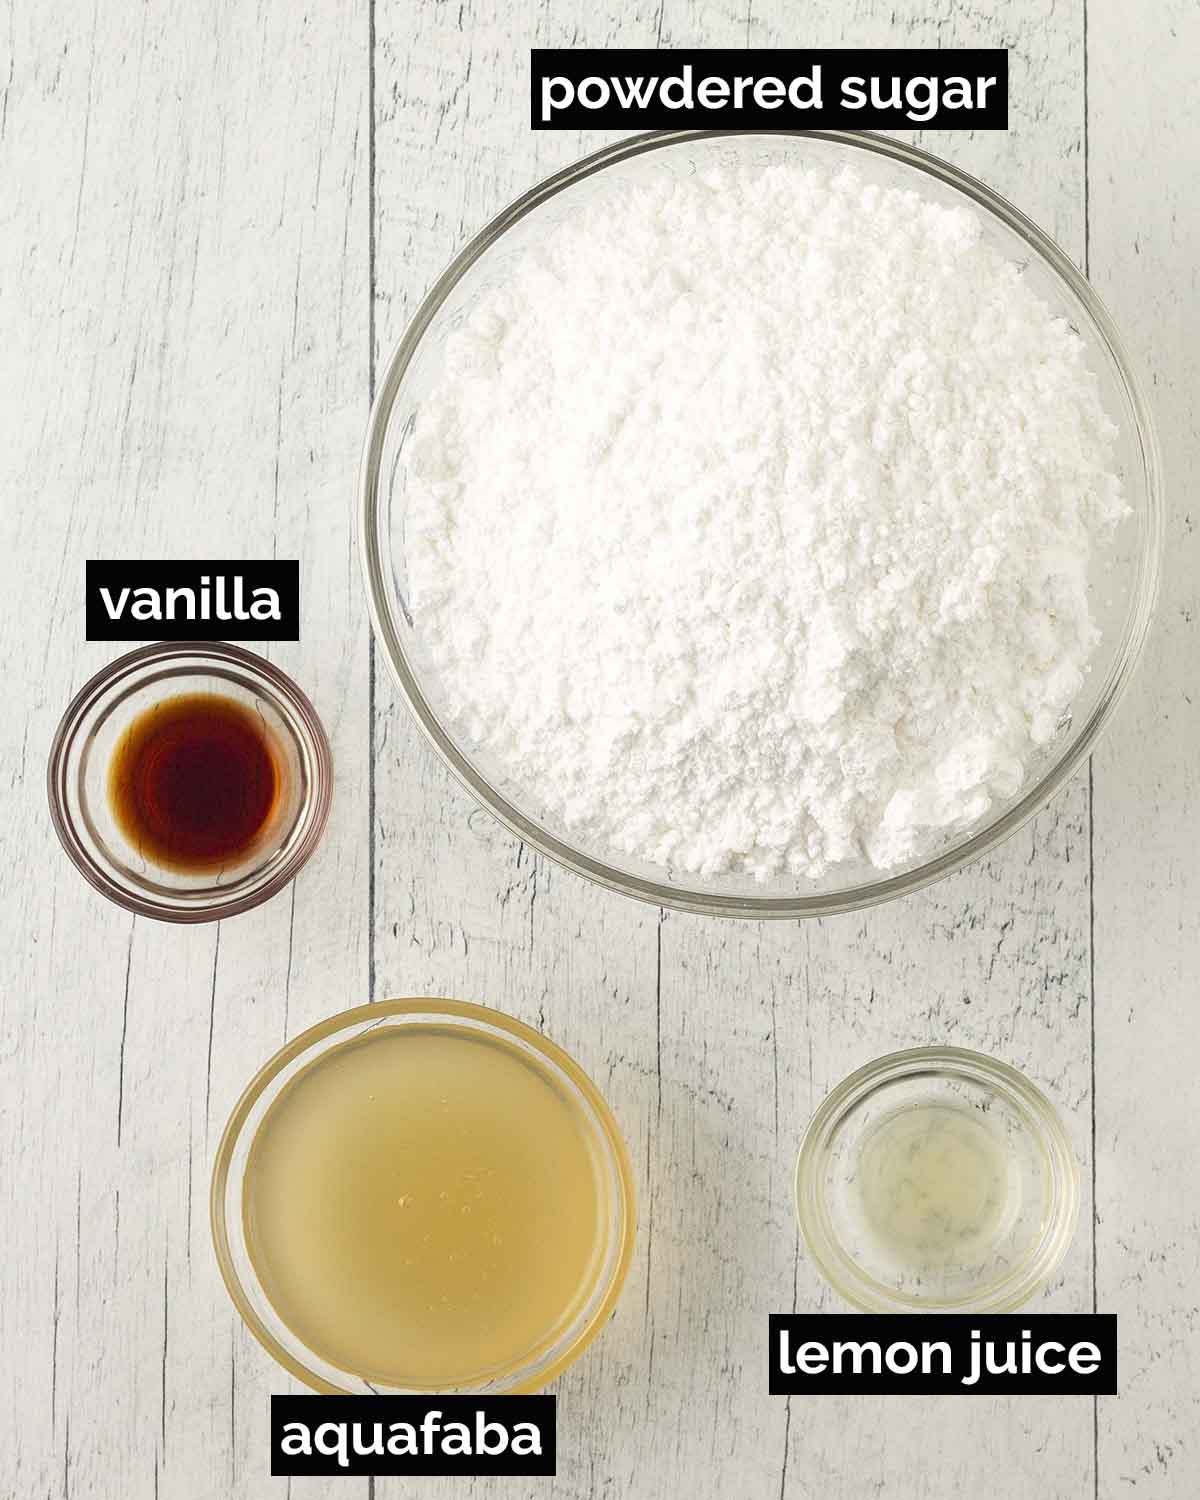 An overhead shot showing the ingredients needed to make corn syrup-free royal icing.